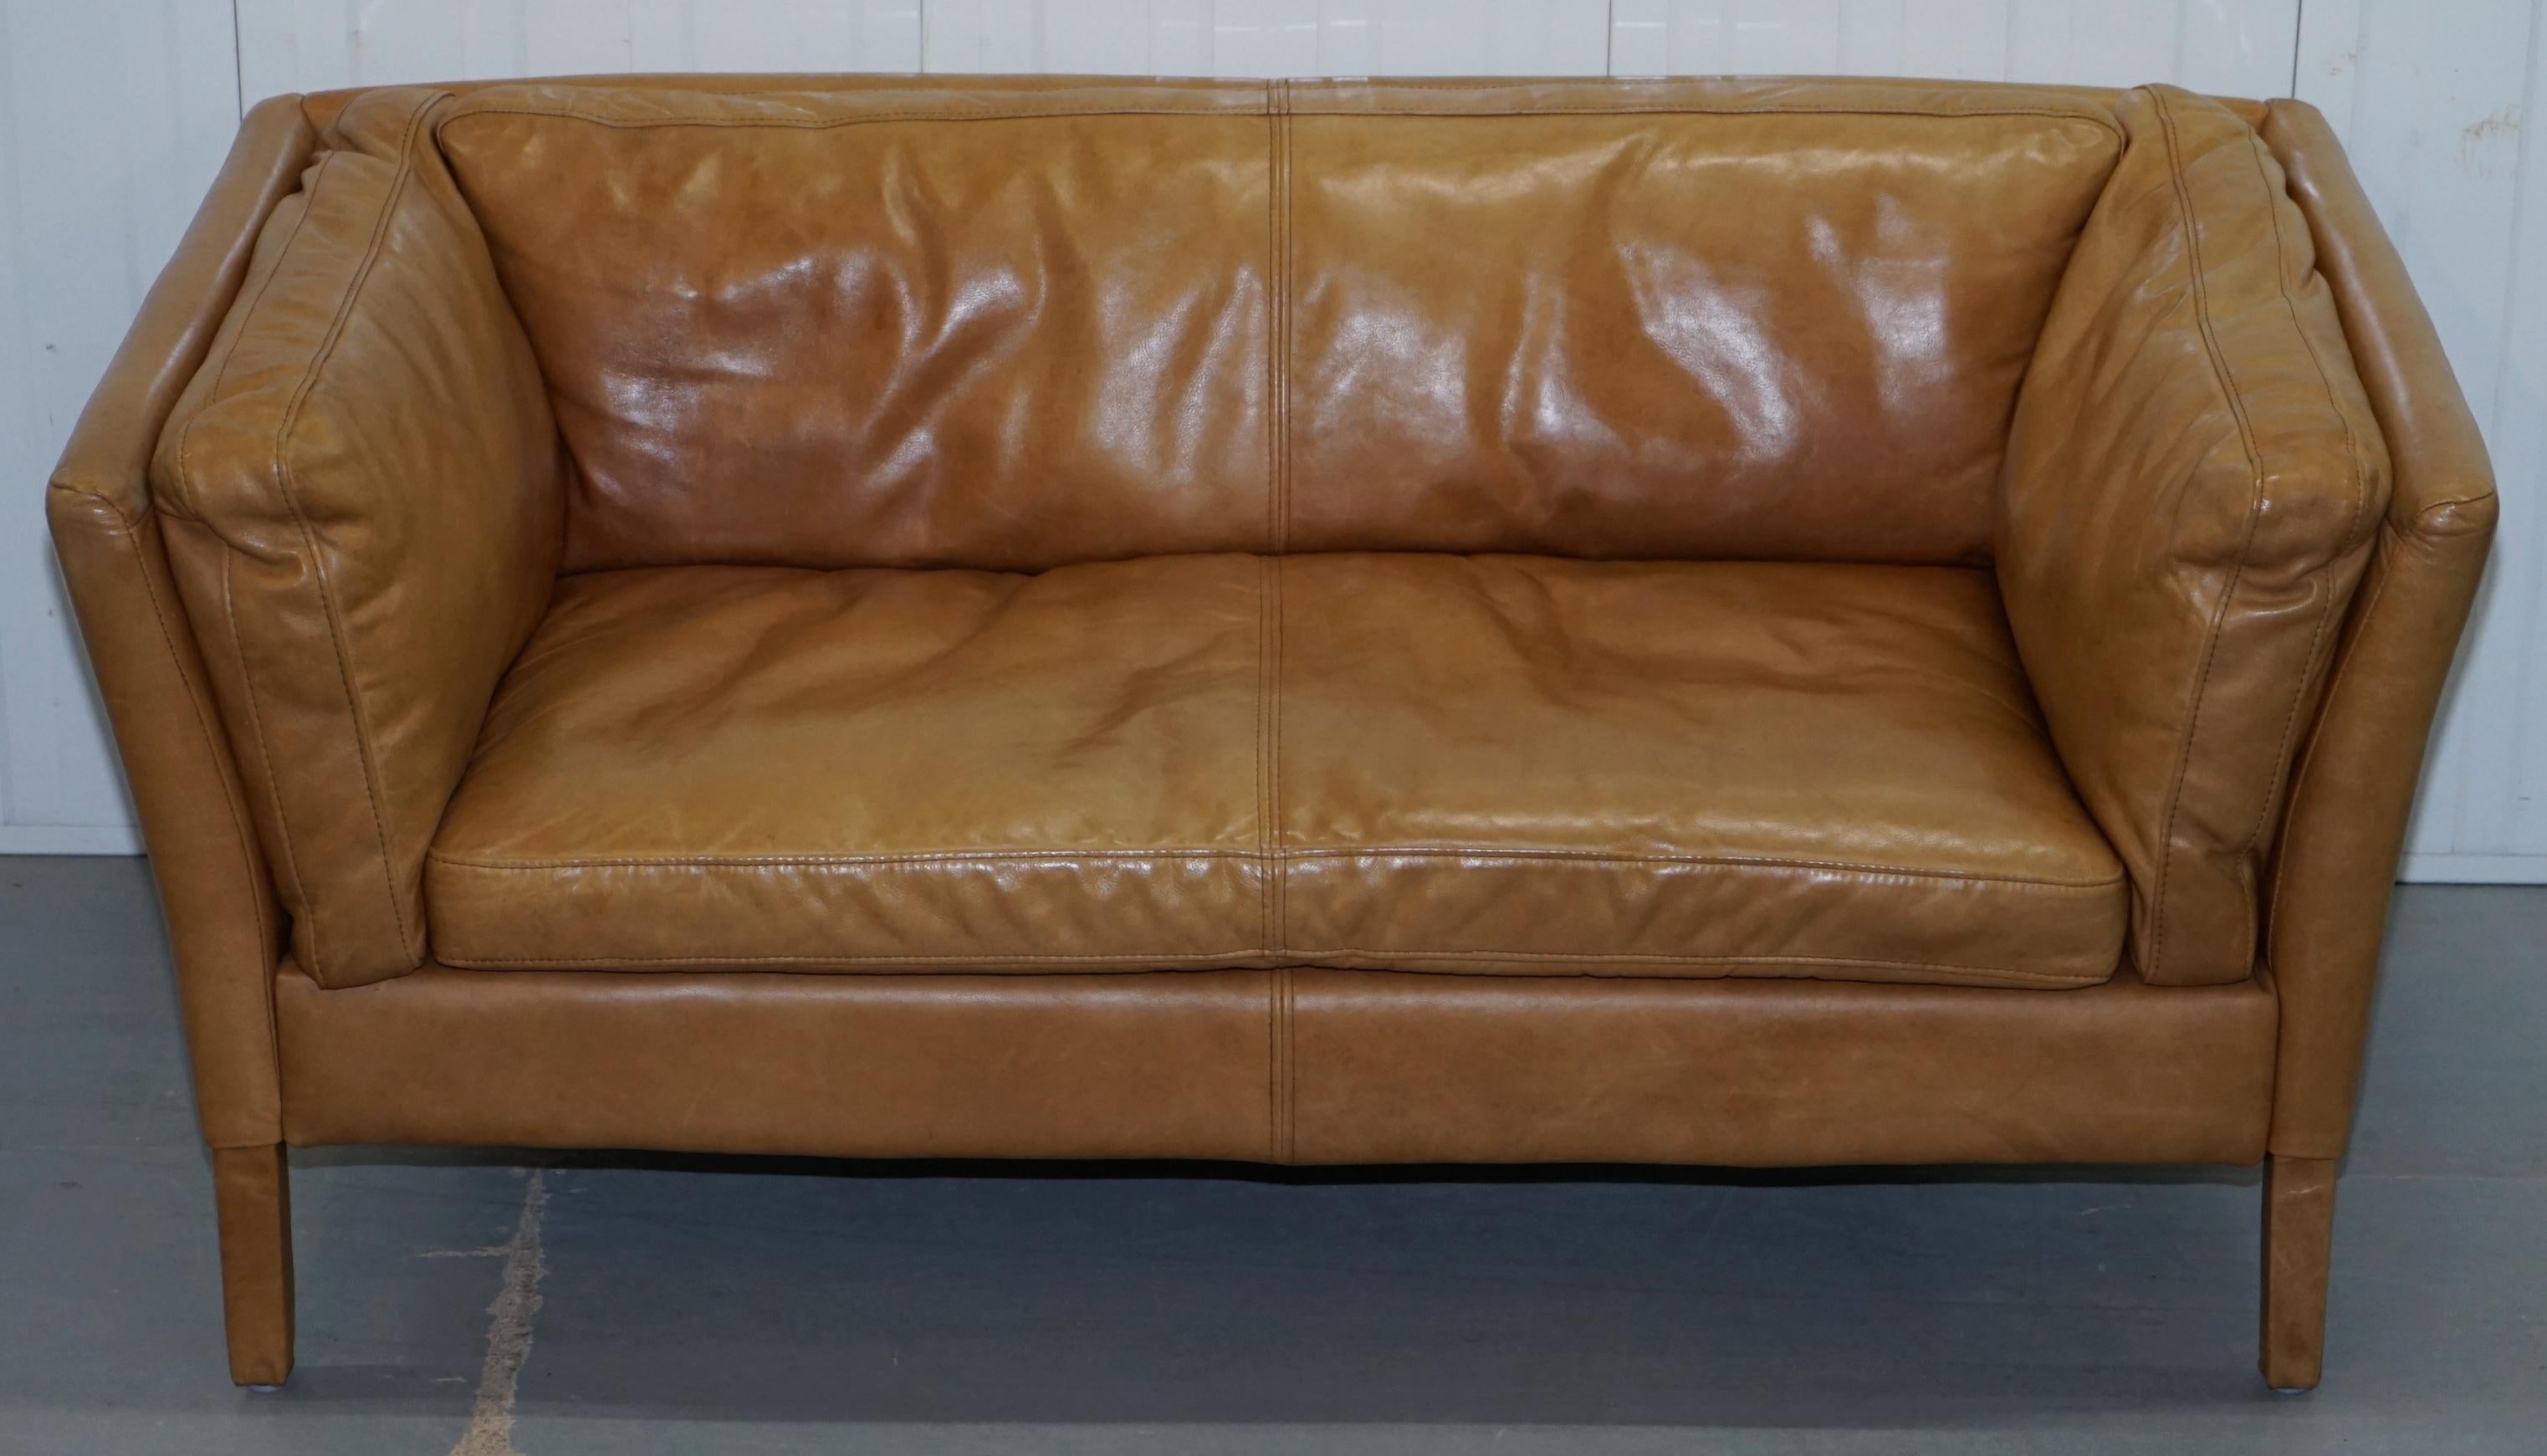 We are delighted to offer for sale this stunning lovely Halo Groucho Napinha Camel brown leather small 2-seat sofa RRP £1349 through John Lewis

I have the matching armchair listed under my items, it’s the exact same model and colour 

The sofa